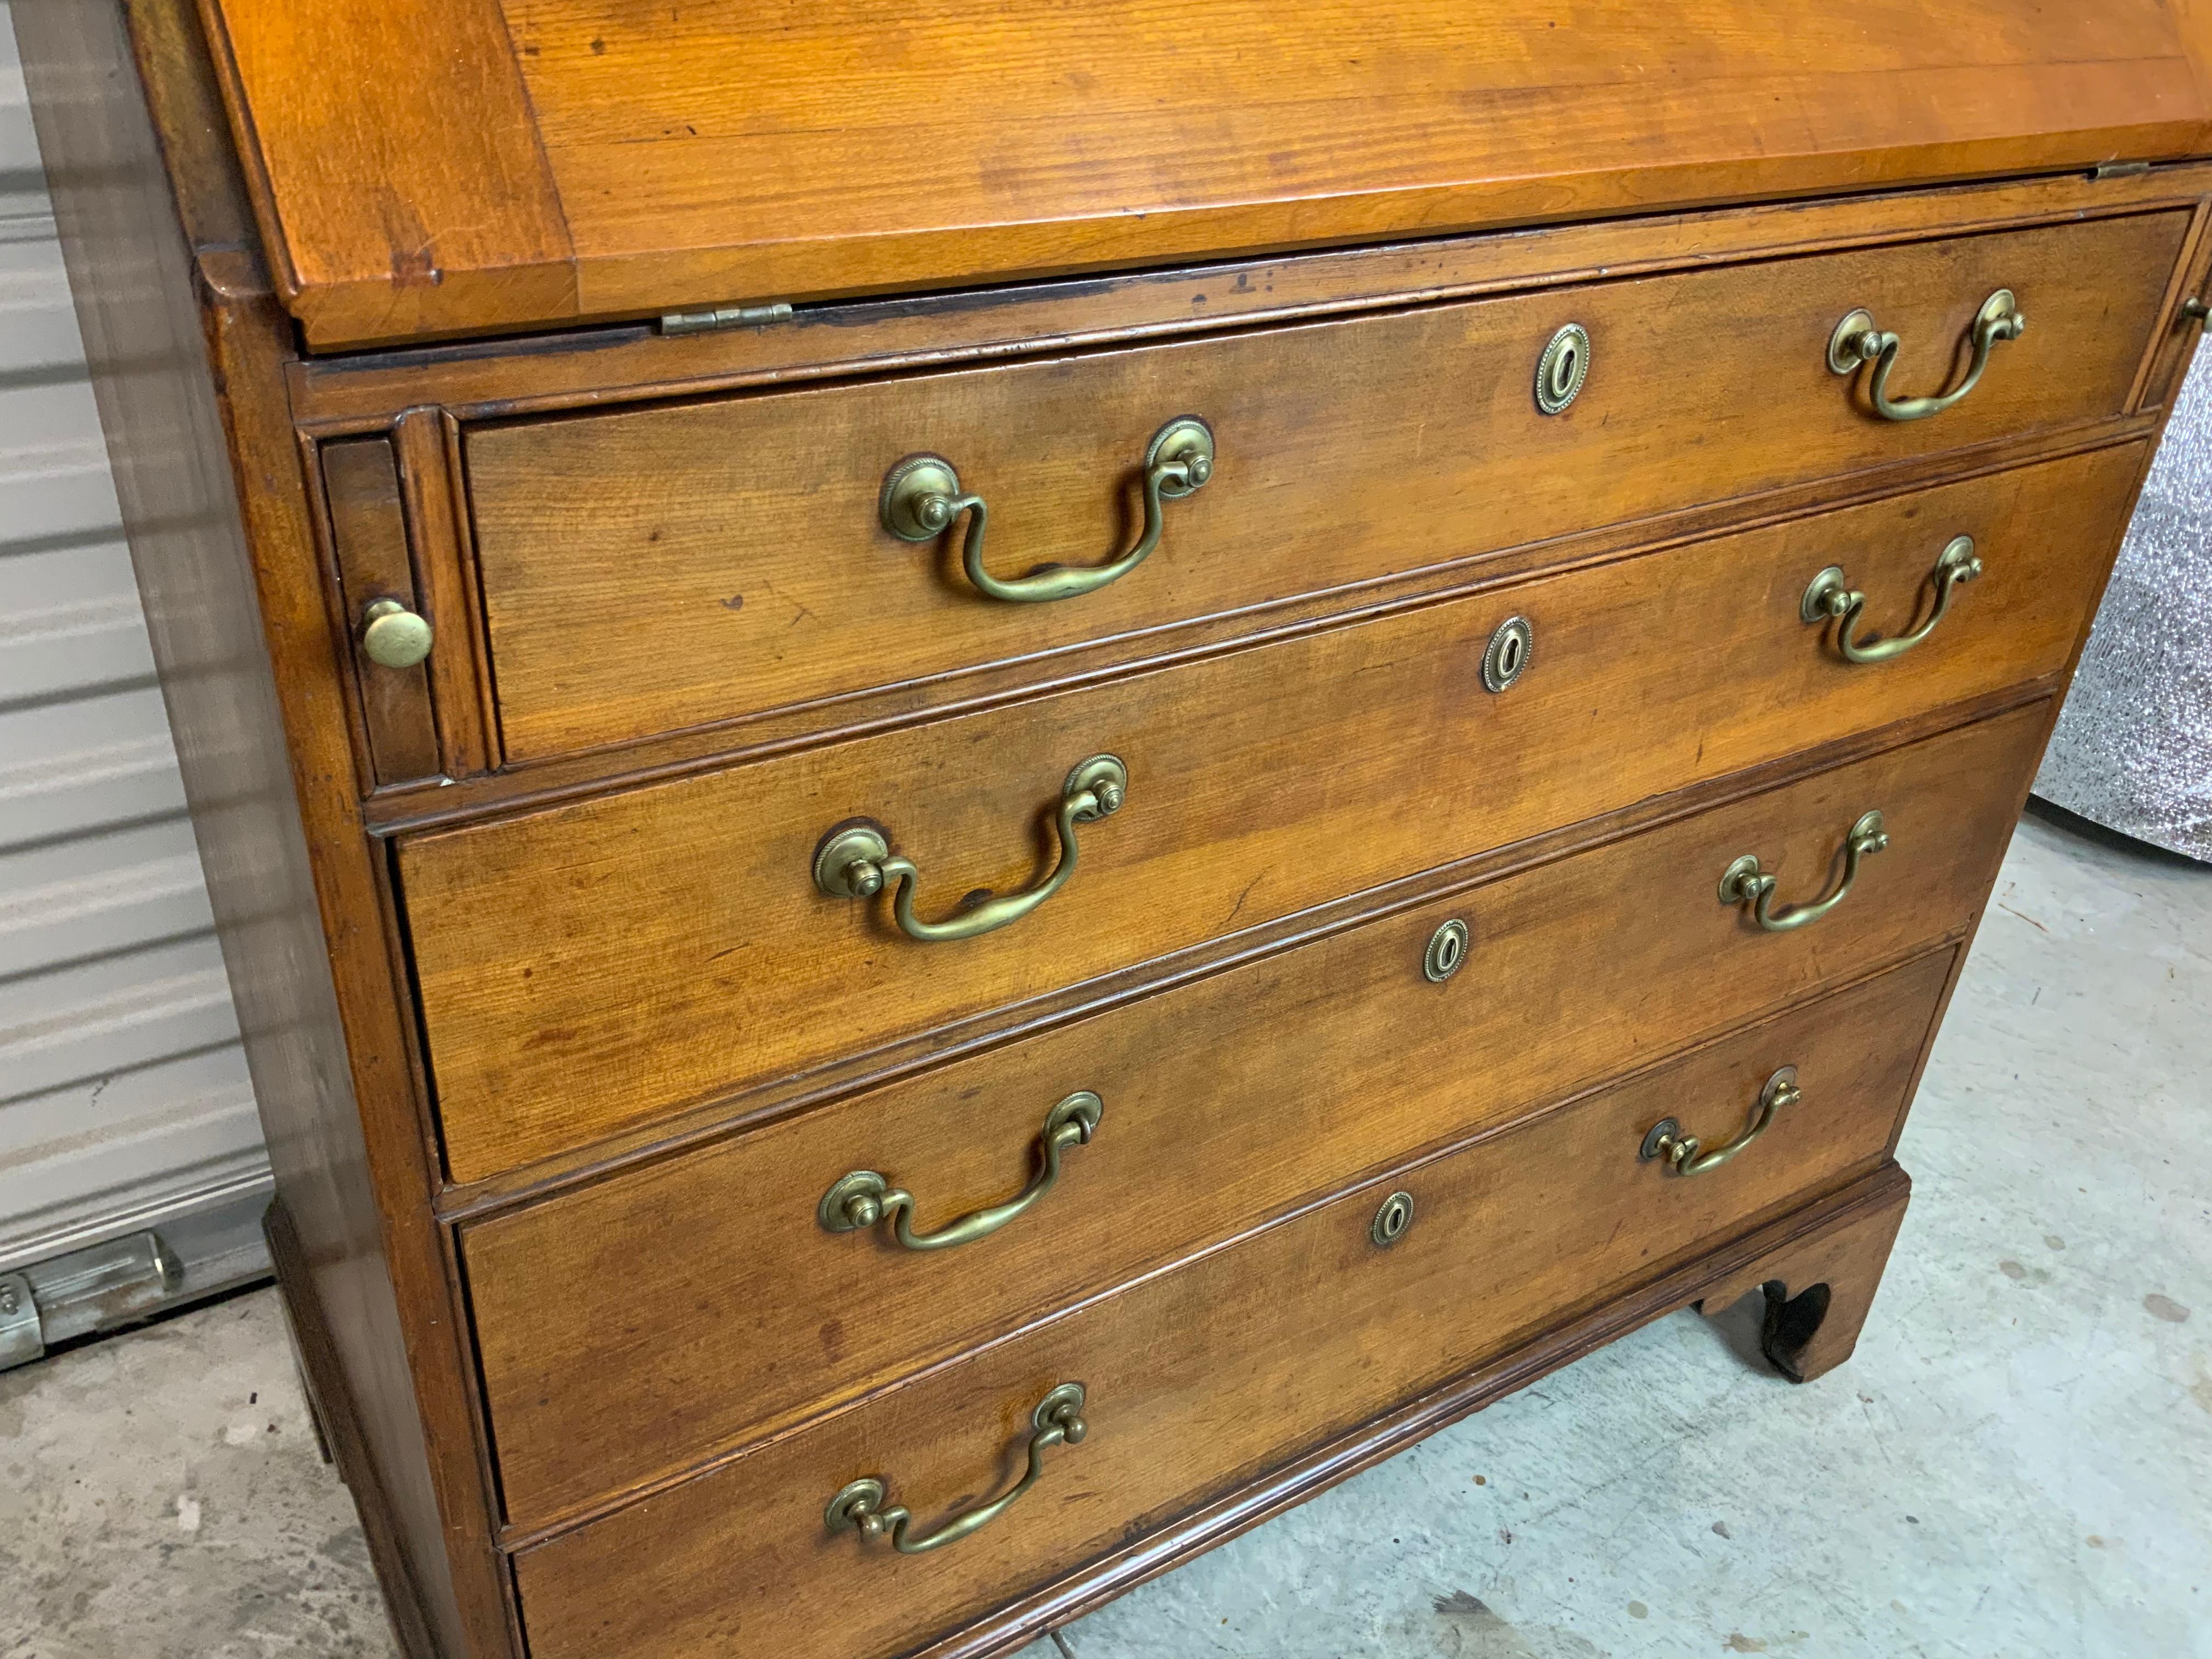 New England late 18th / early 19th century Cherry slant front desk sitting on nicely formed tall bracket feet. The hardware appears to be original and all the drawers are working properly. Original working lock and key for the lid and nicely